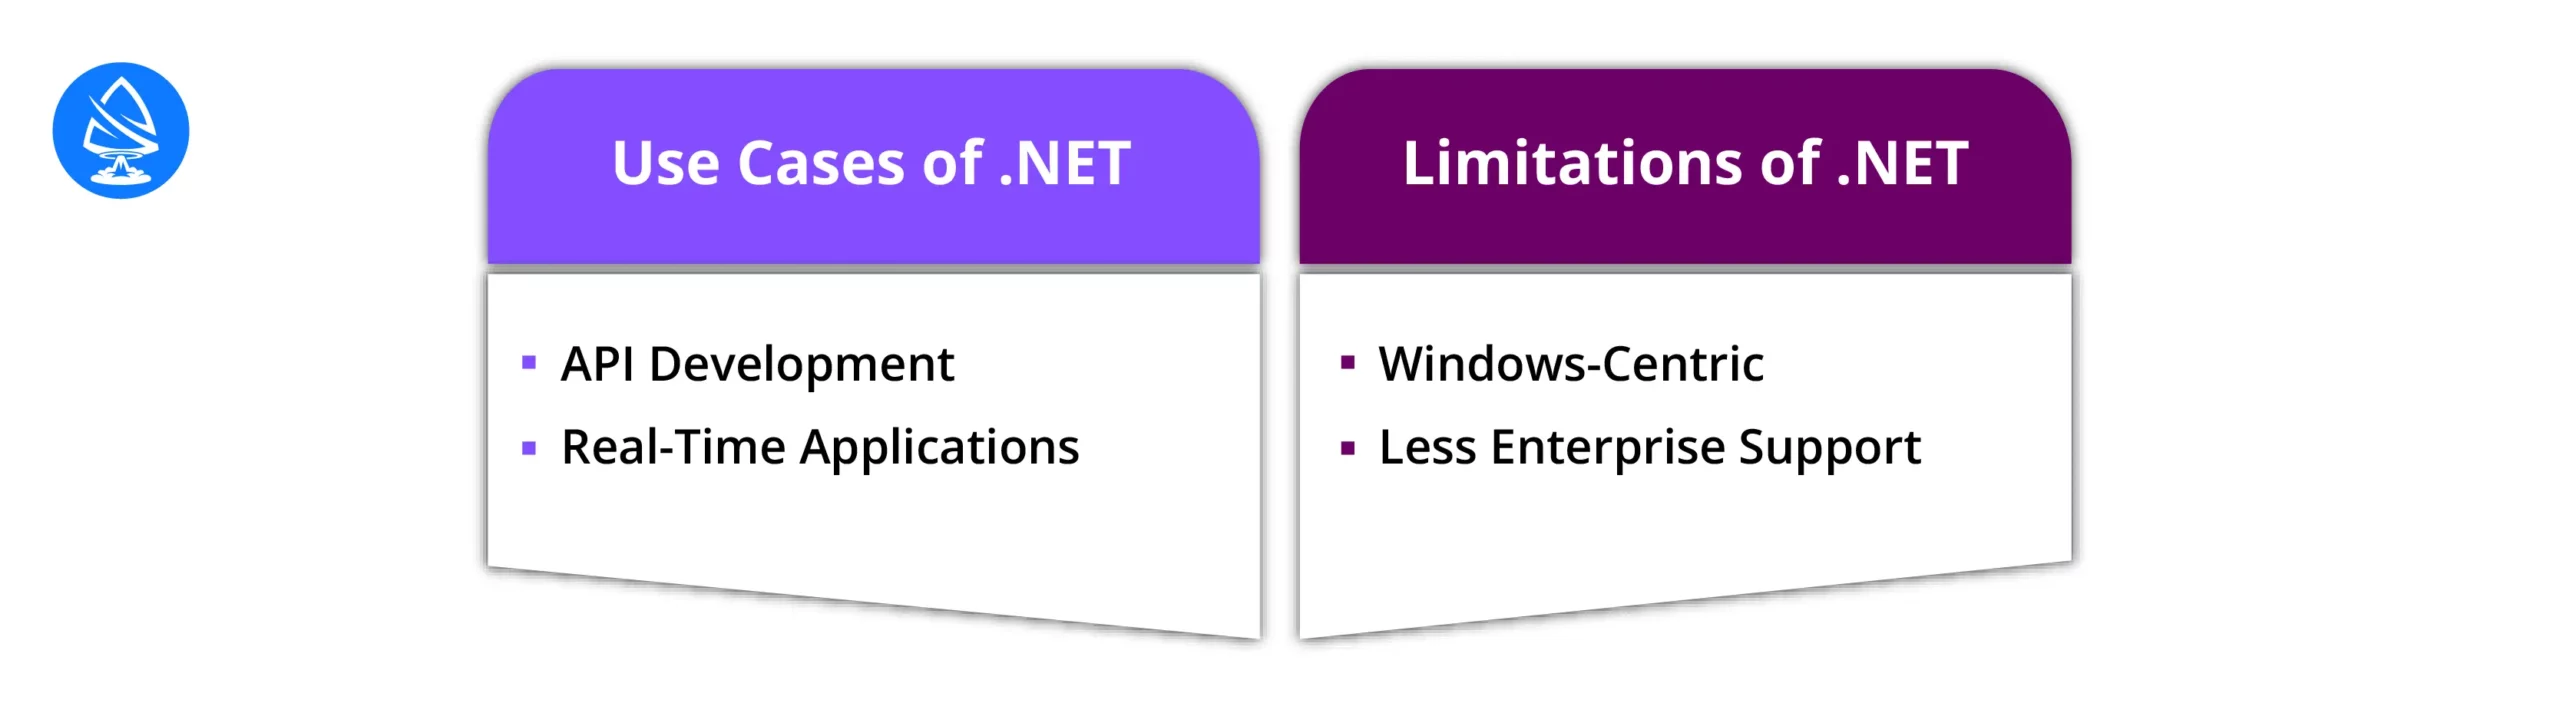 Use Cases of .NET 